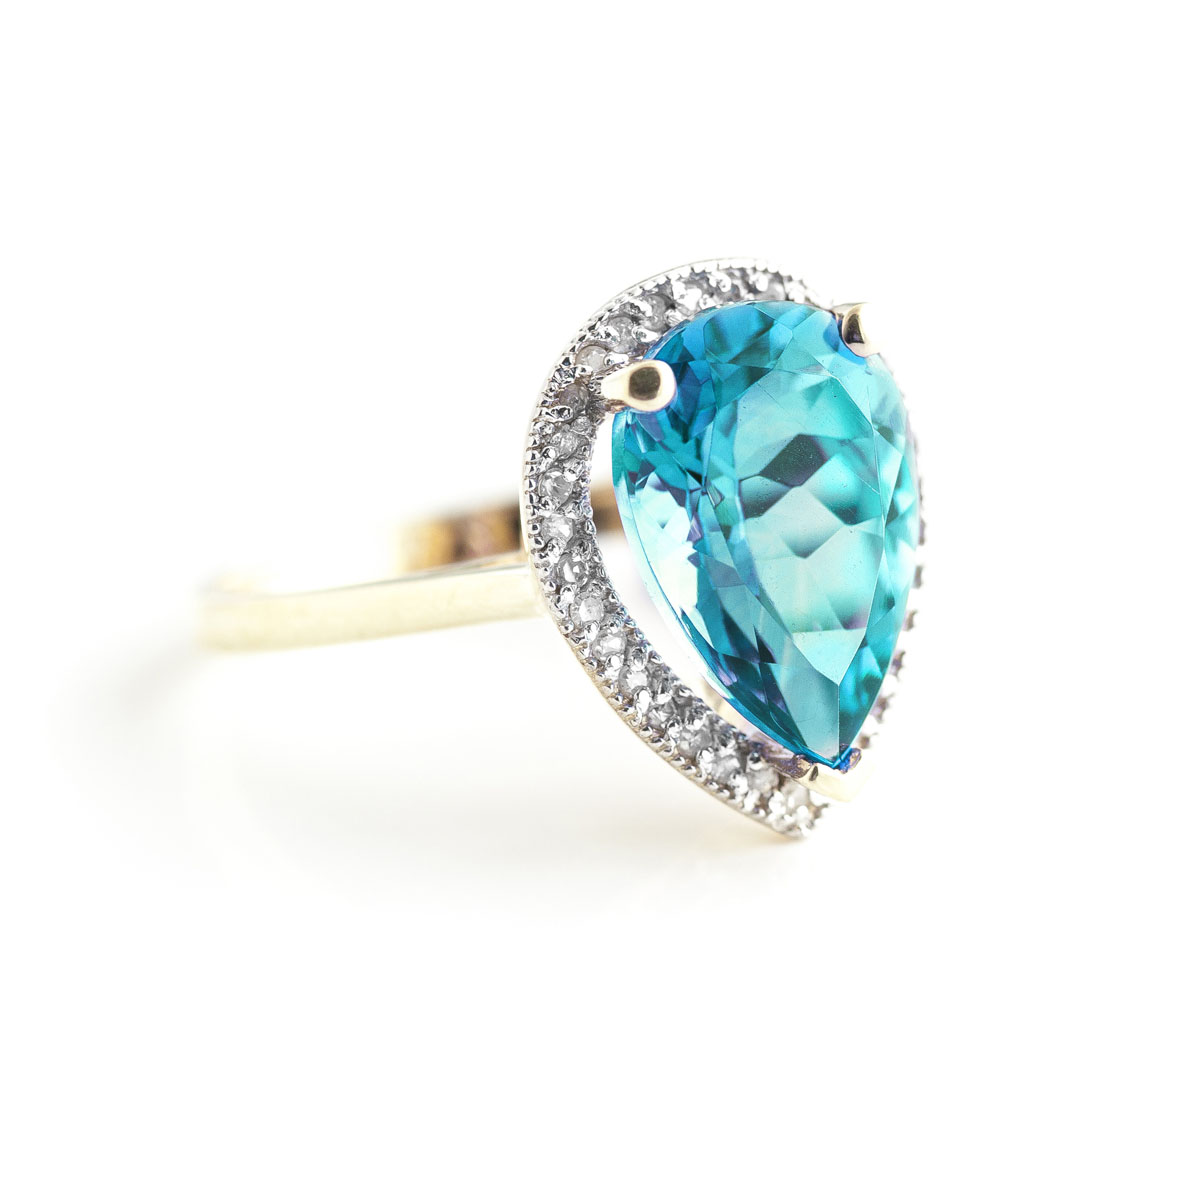 Blue Topaz Halo Ring 4.66 ctw in 9ct Gold